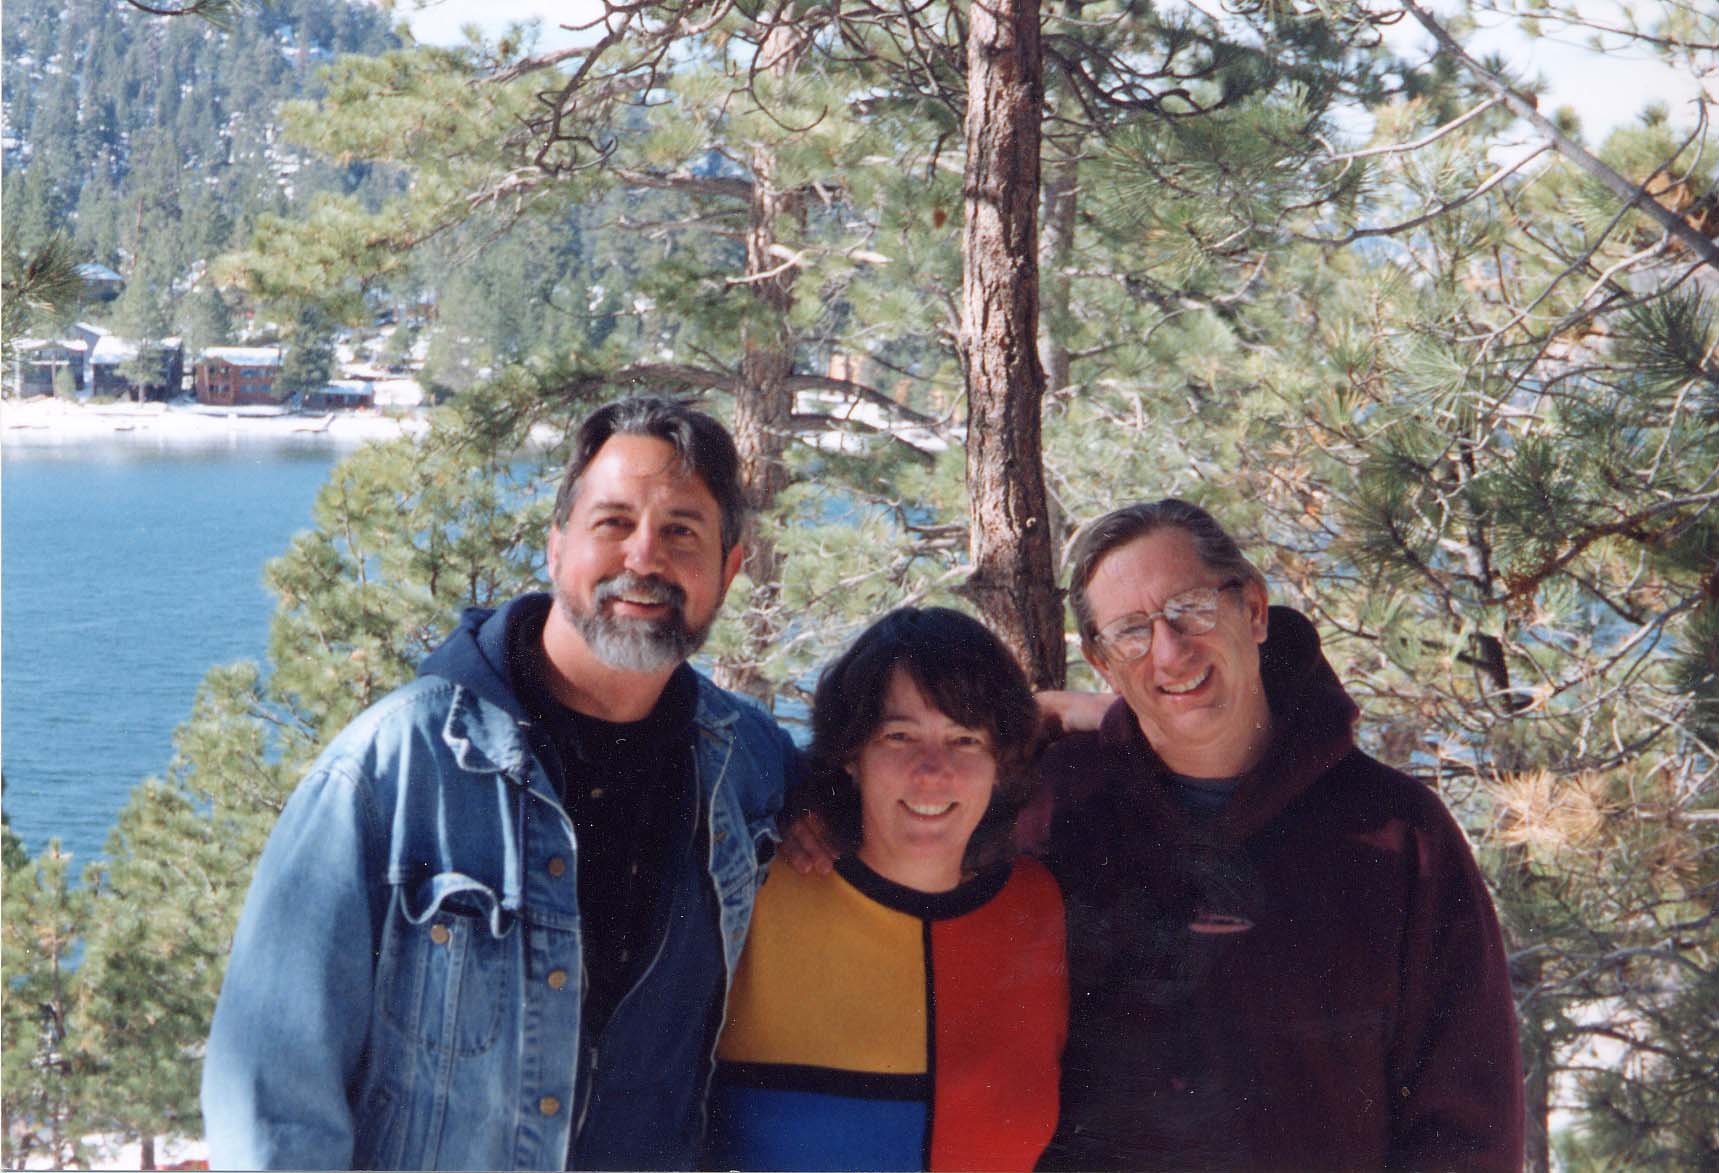 Lama Thapkhay, Pat Schotka and Keith Hale